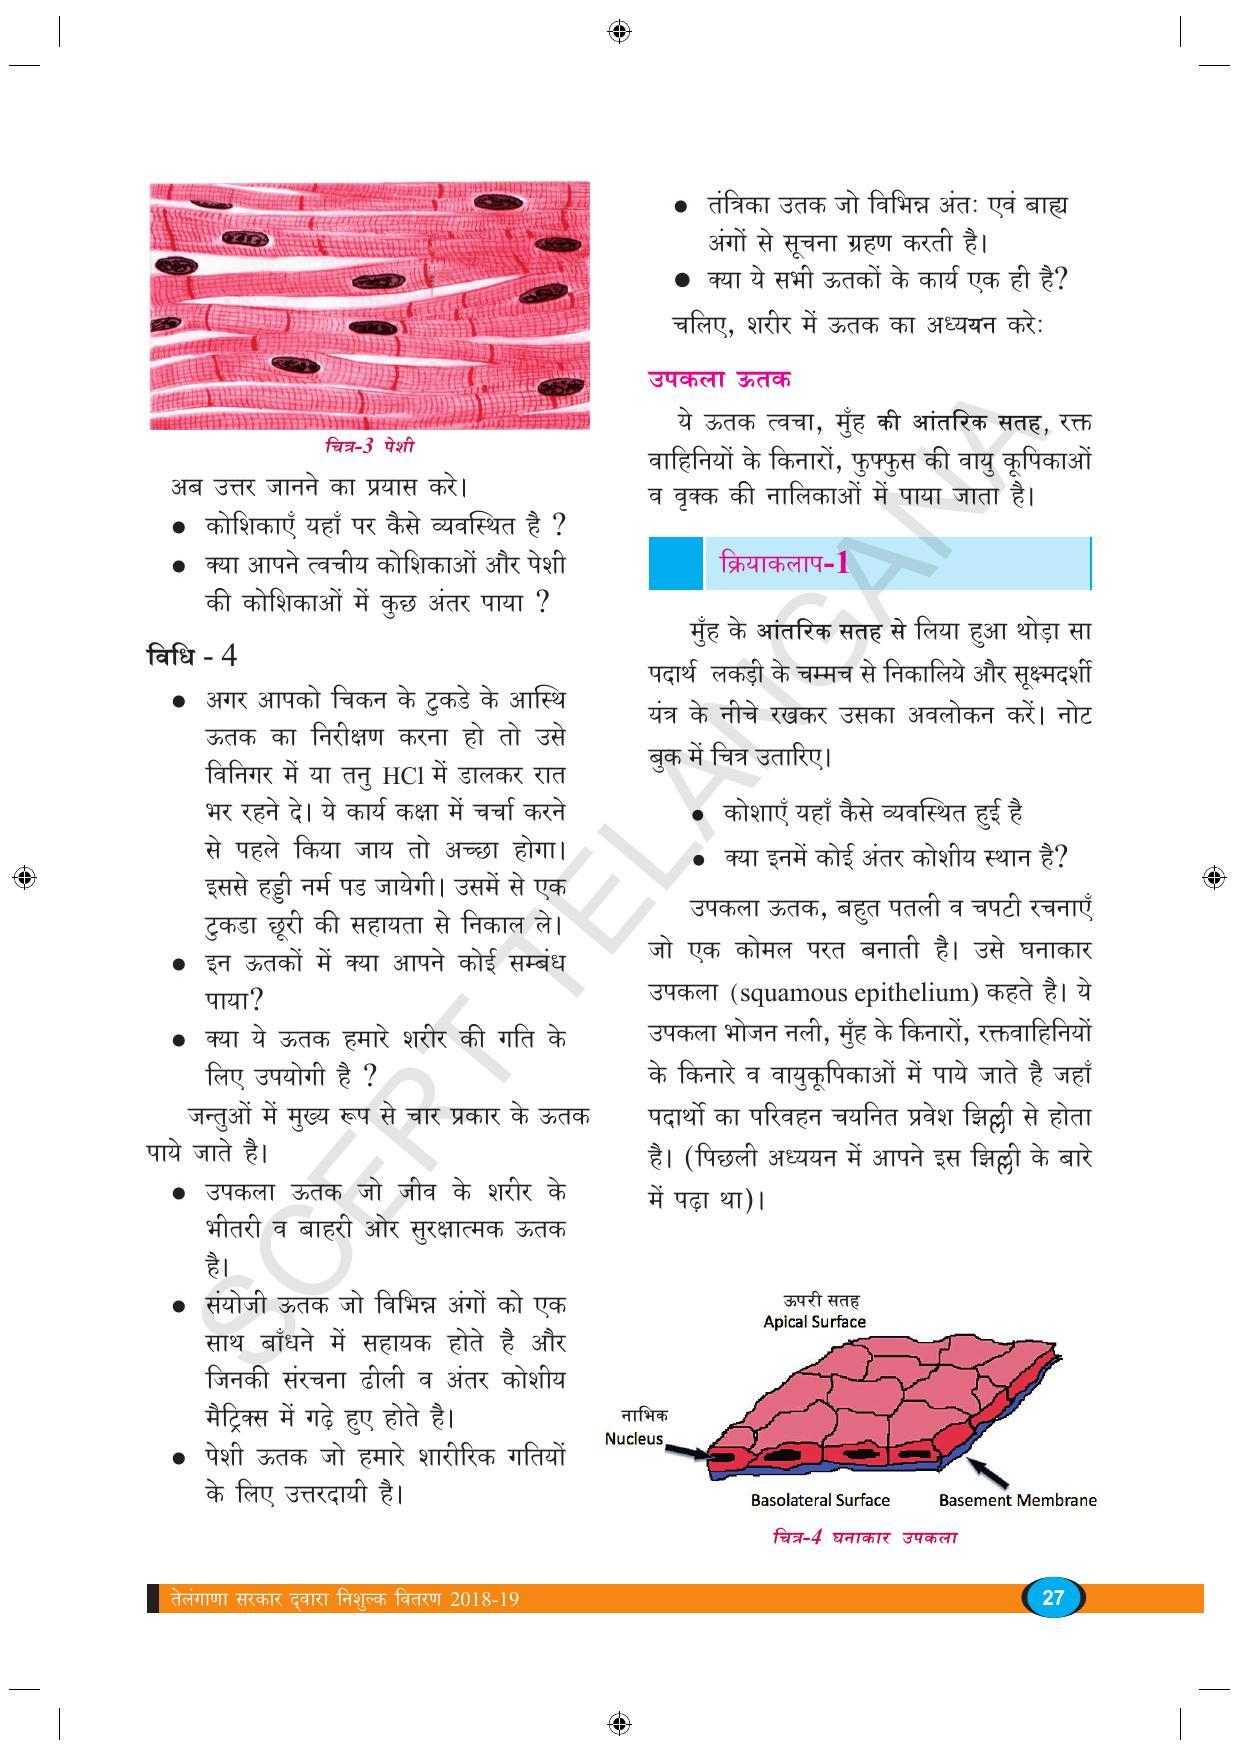 TS SCERT Class 9 Biological Science (Hindi Medium) Text Book - Page 39